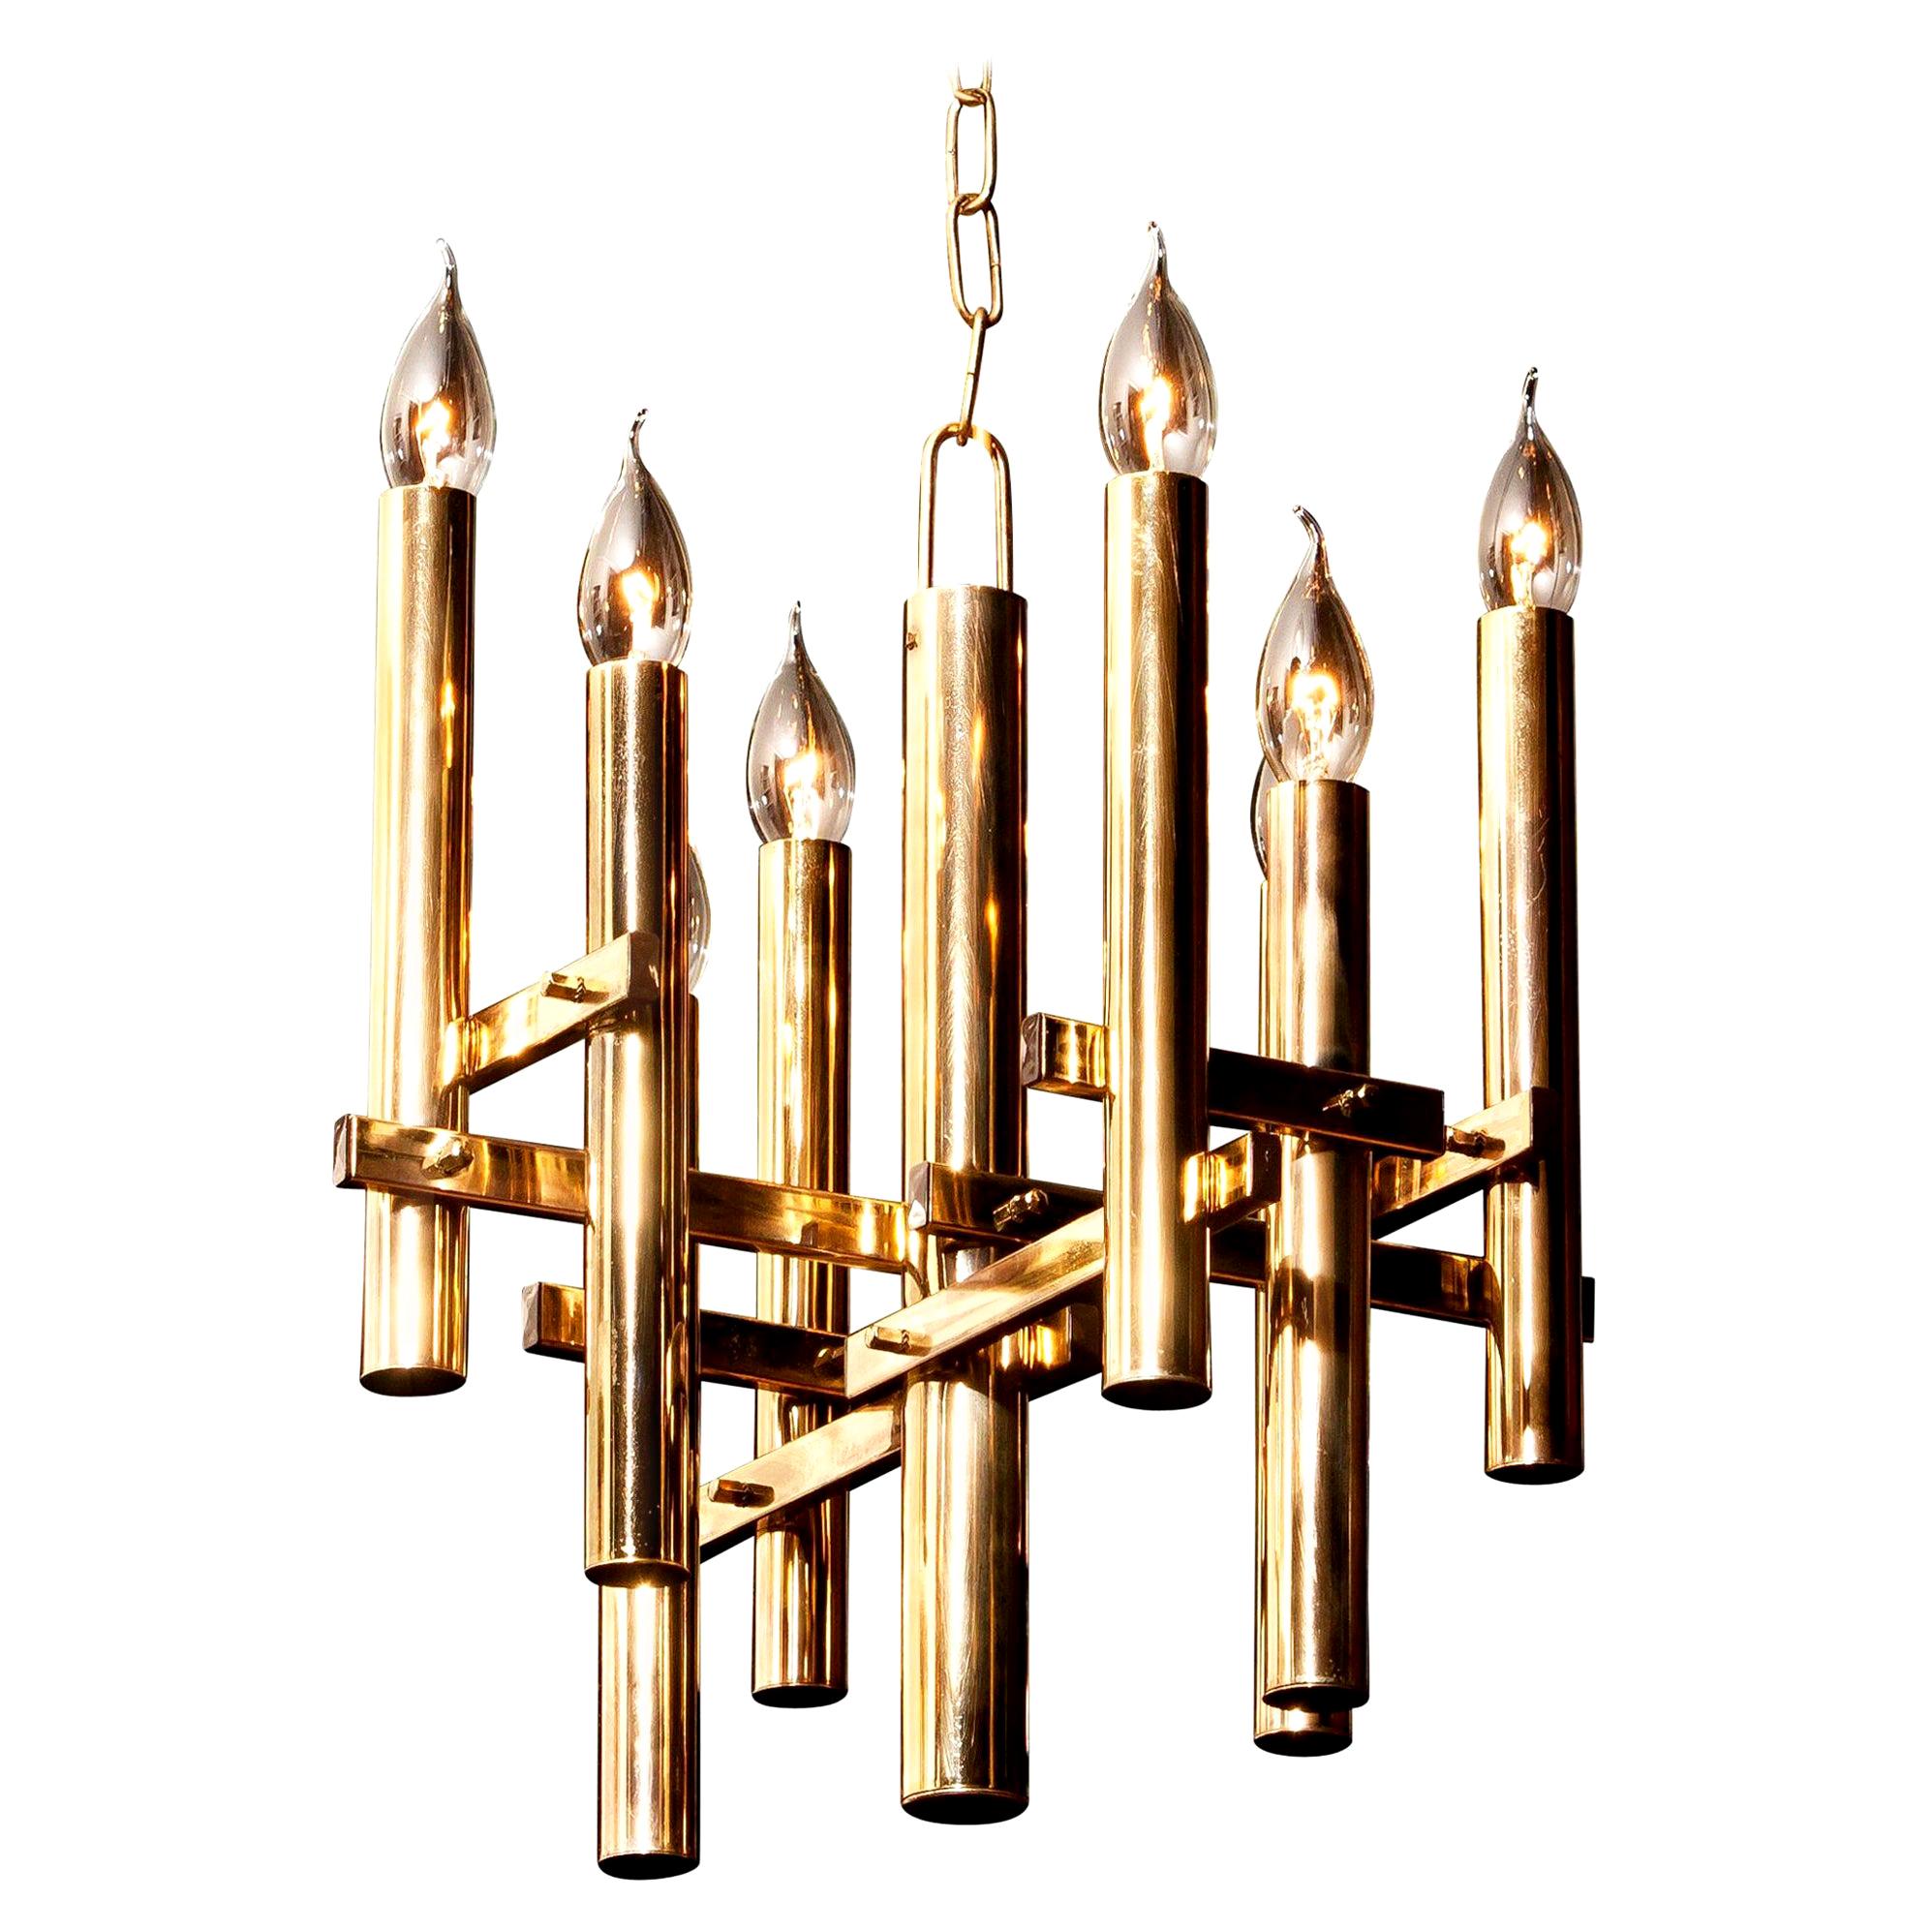 Beautiful brass pendant by Gaetano Sciolari, Italy.
This wonderful lamp has eight fittings.
The height is adjustable.
It is in excellent condition.
Period, 1960s.
Dimensions: H 93 cm, ø 40 cm.